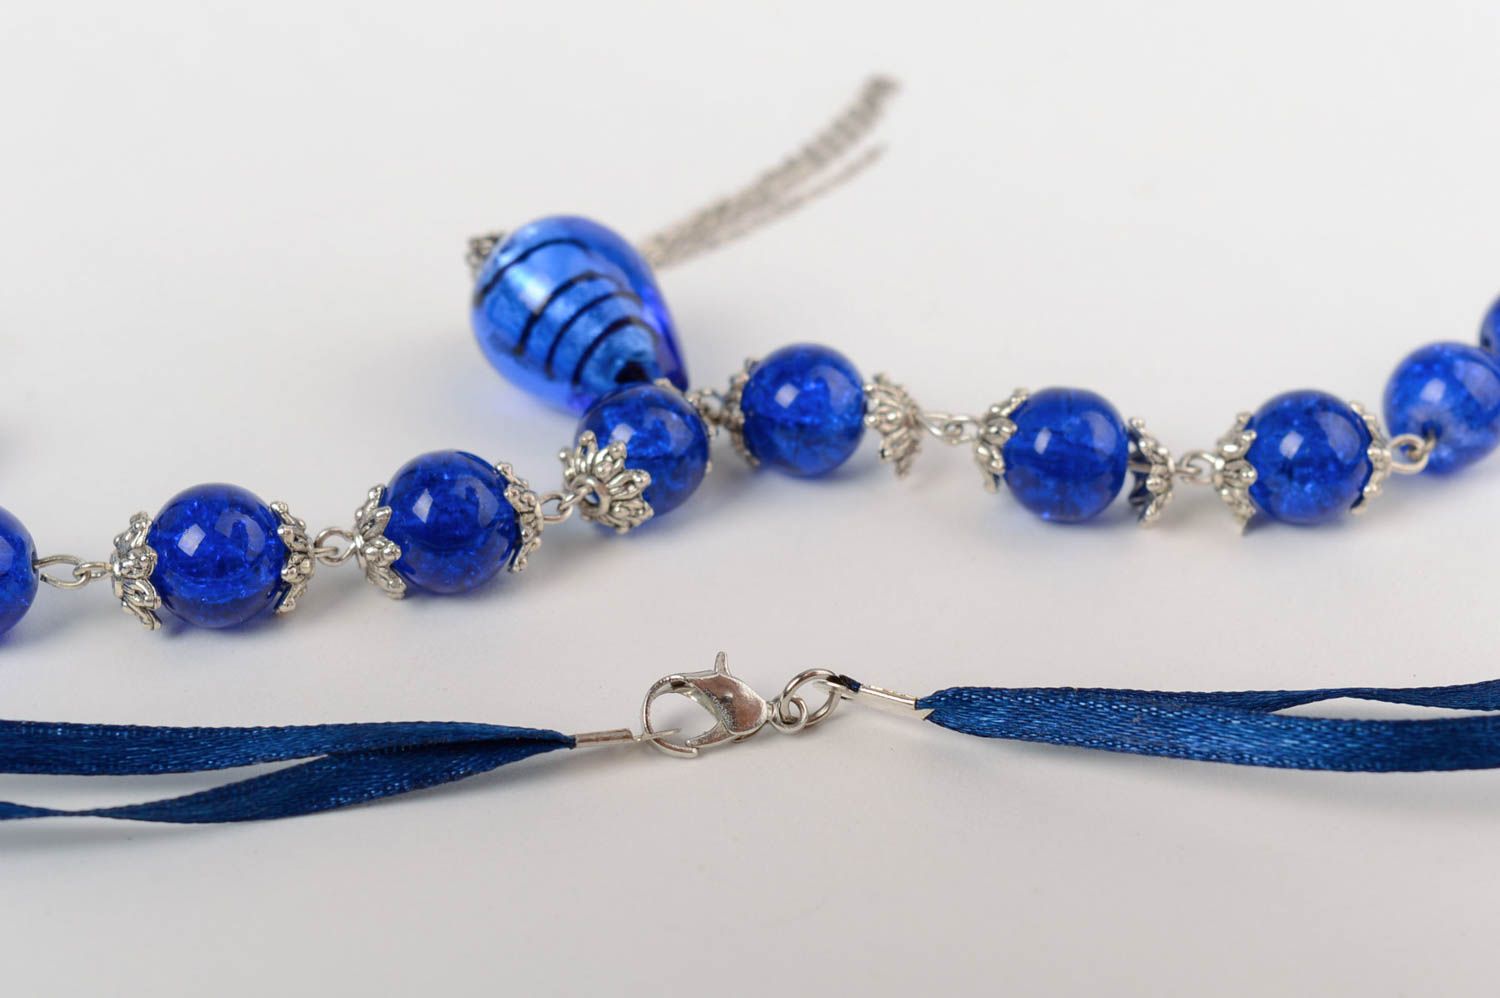 Handmade deep blue designer necklace with glass beads on satin ribbon photo 4